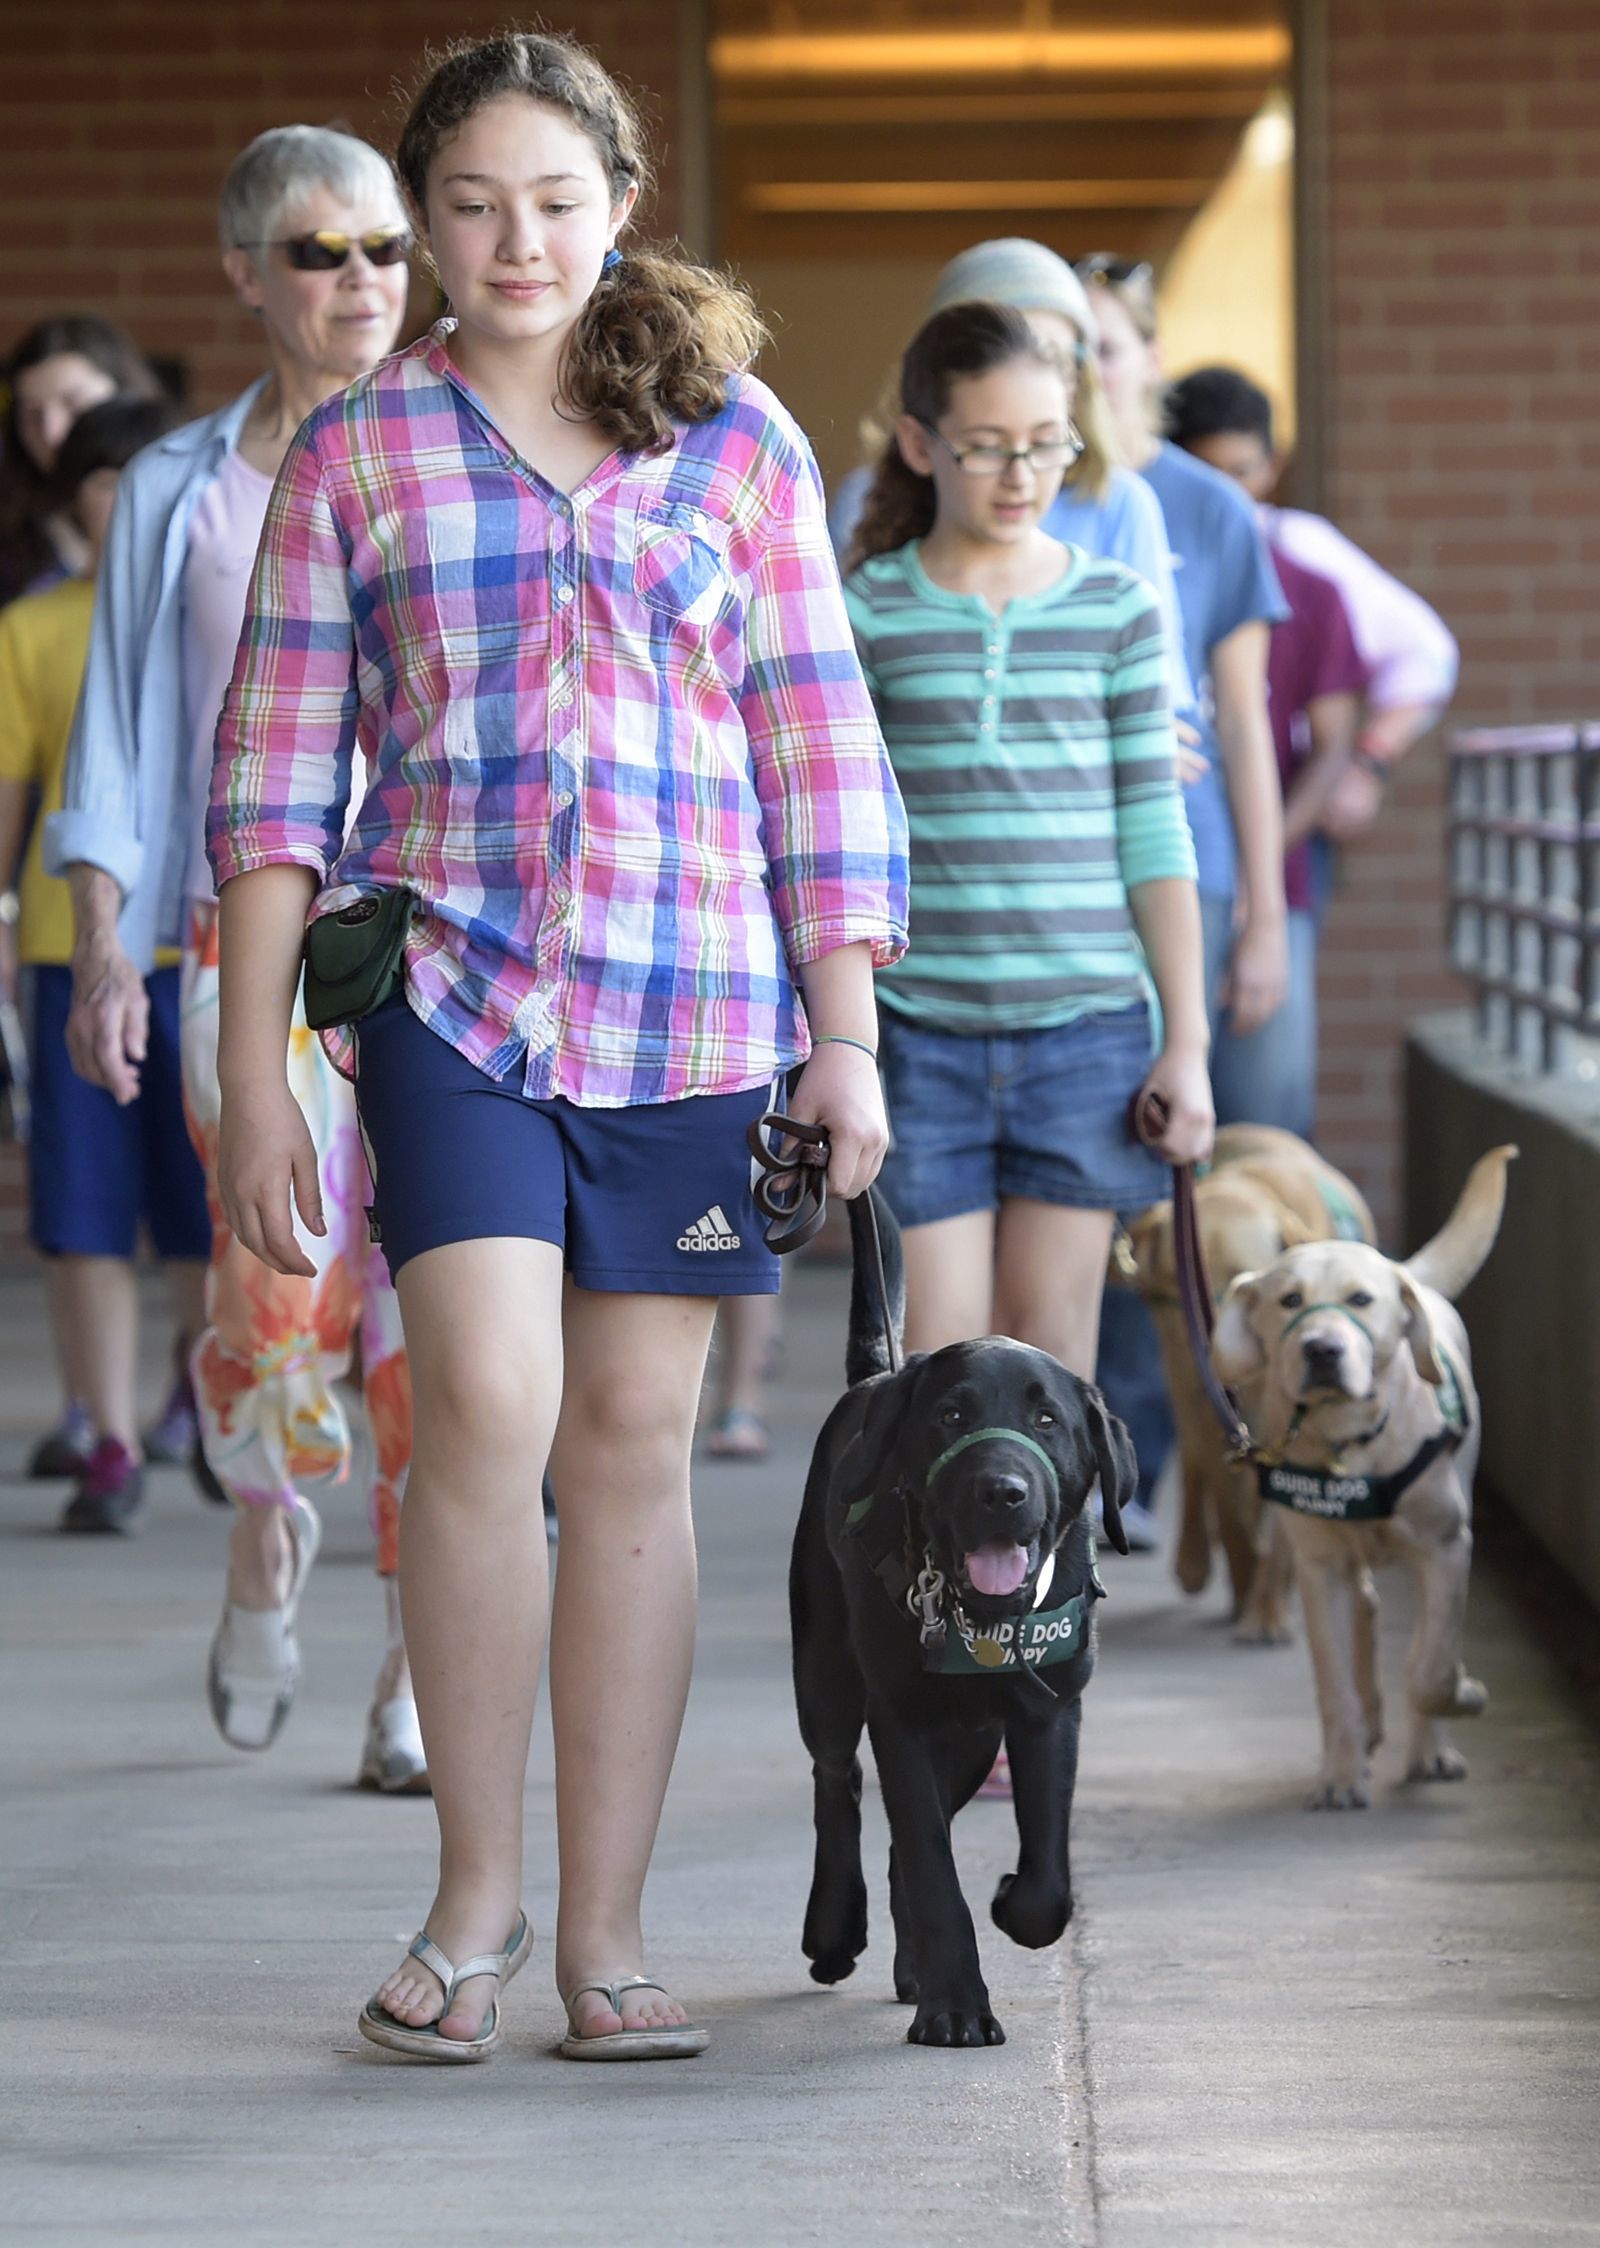 Elizabeth Beck, 13, of Scio, Oregon, leads Vale, a puppy training to be a guide dog for the blind, on a field trip to Linn-Benton Community College on April 19. Behind her is Julia Marsh, 11, of Albany, with Clarita.